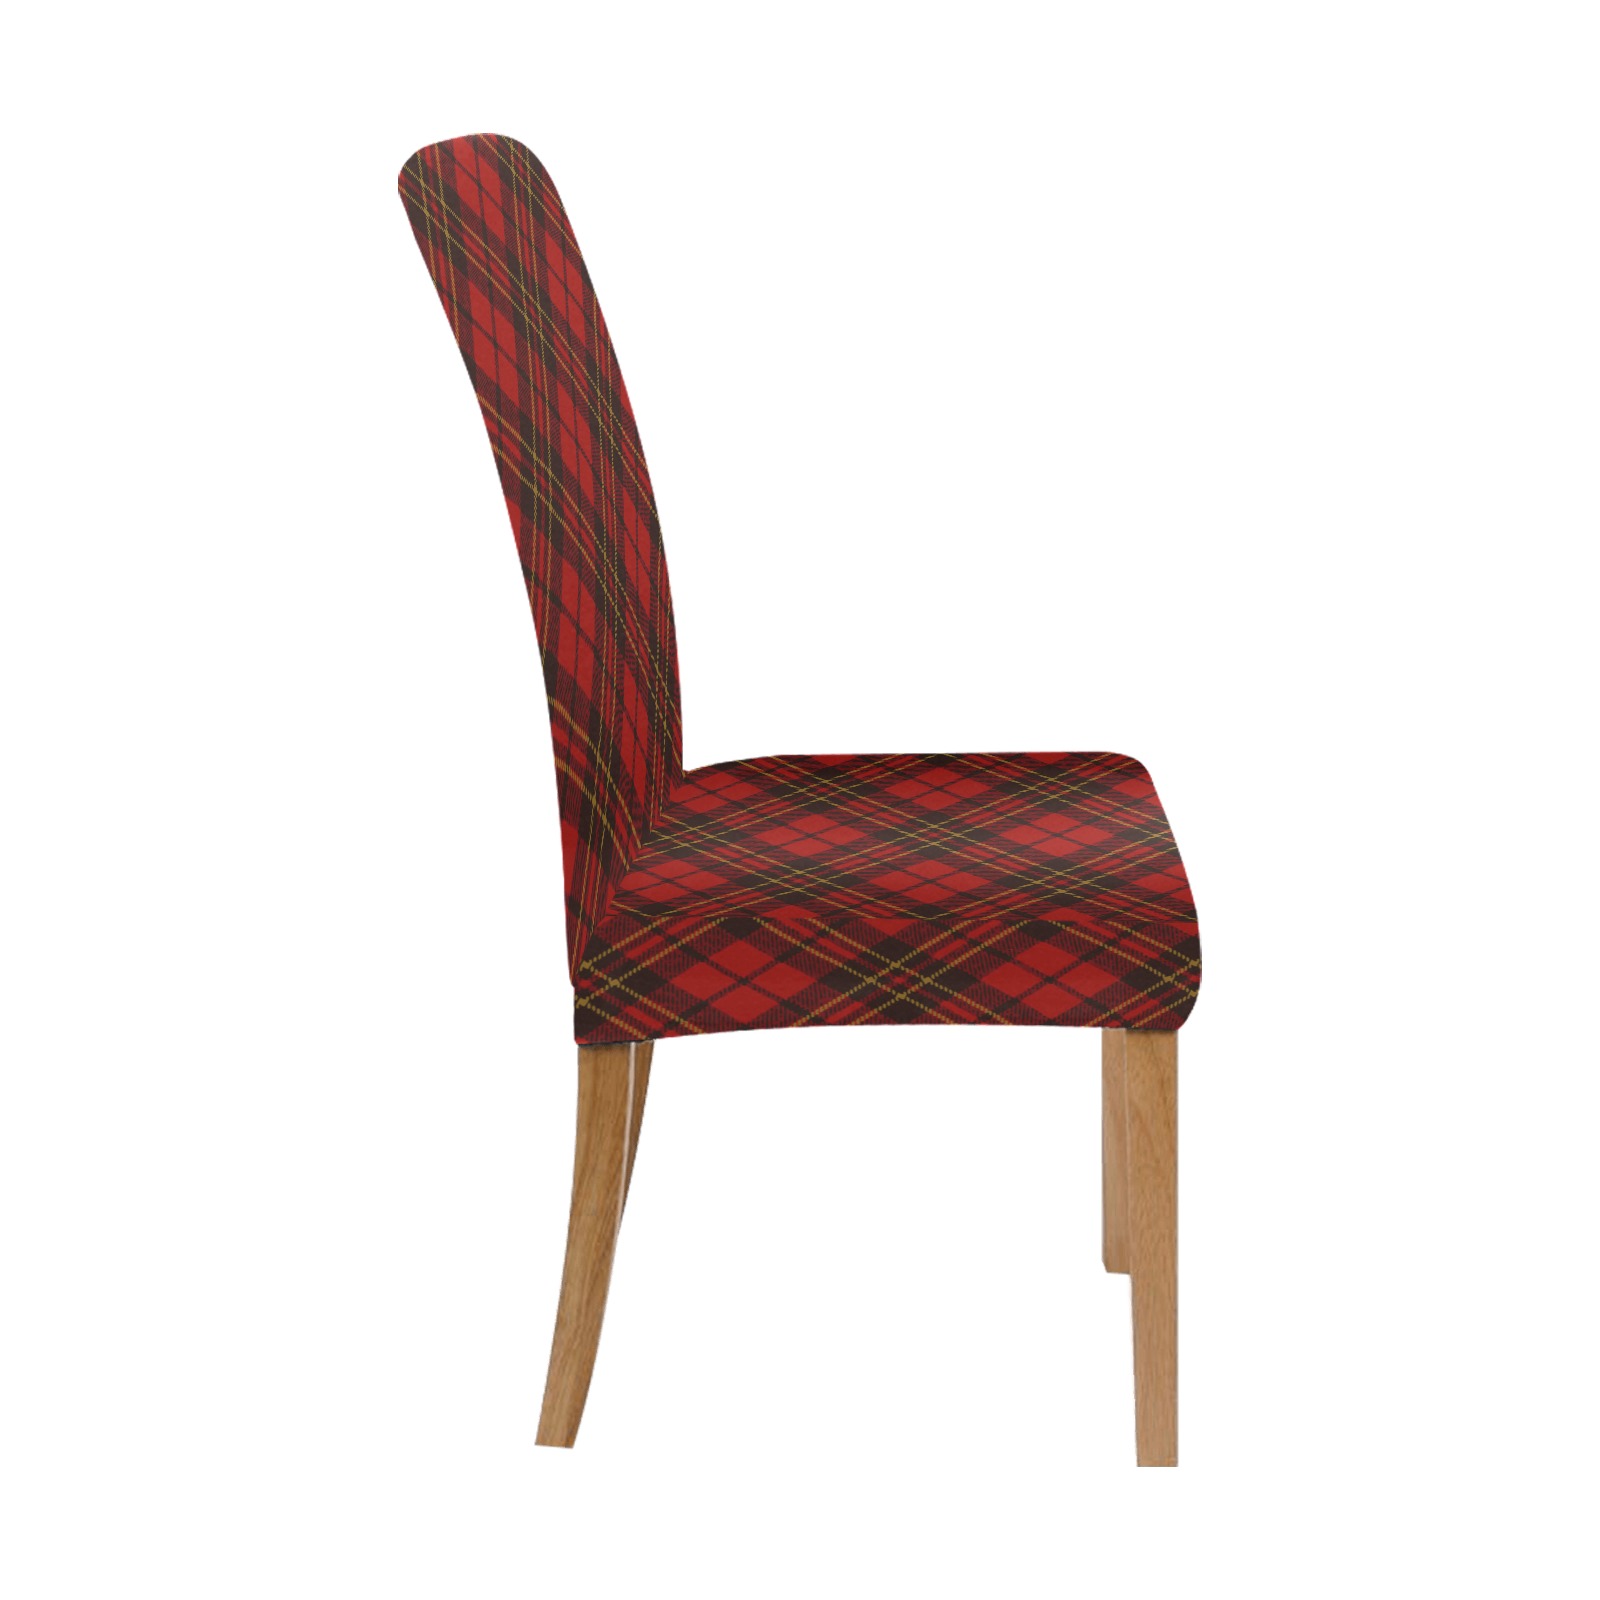 Red tartan plaid winter Christmas pattern holidays Chair Cover (Pack of 4)